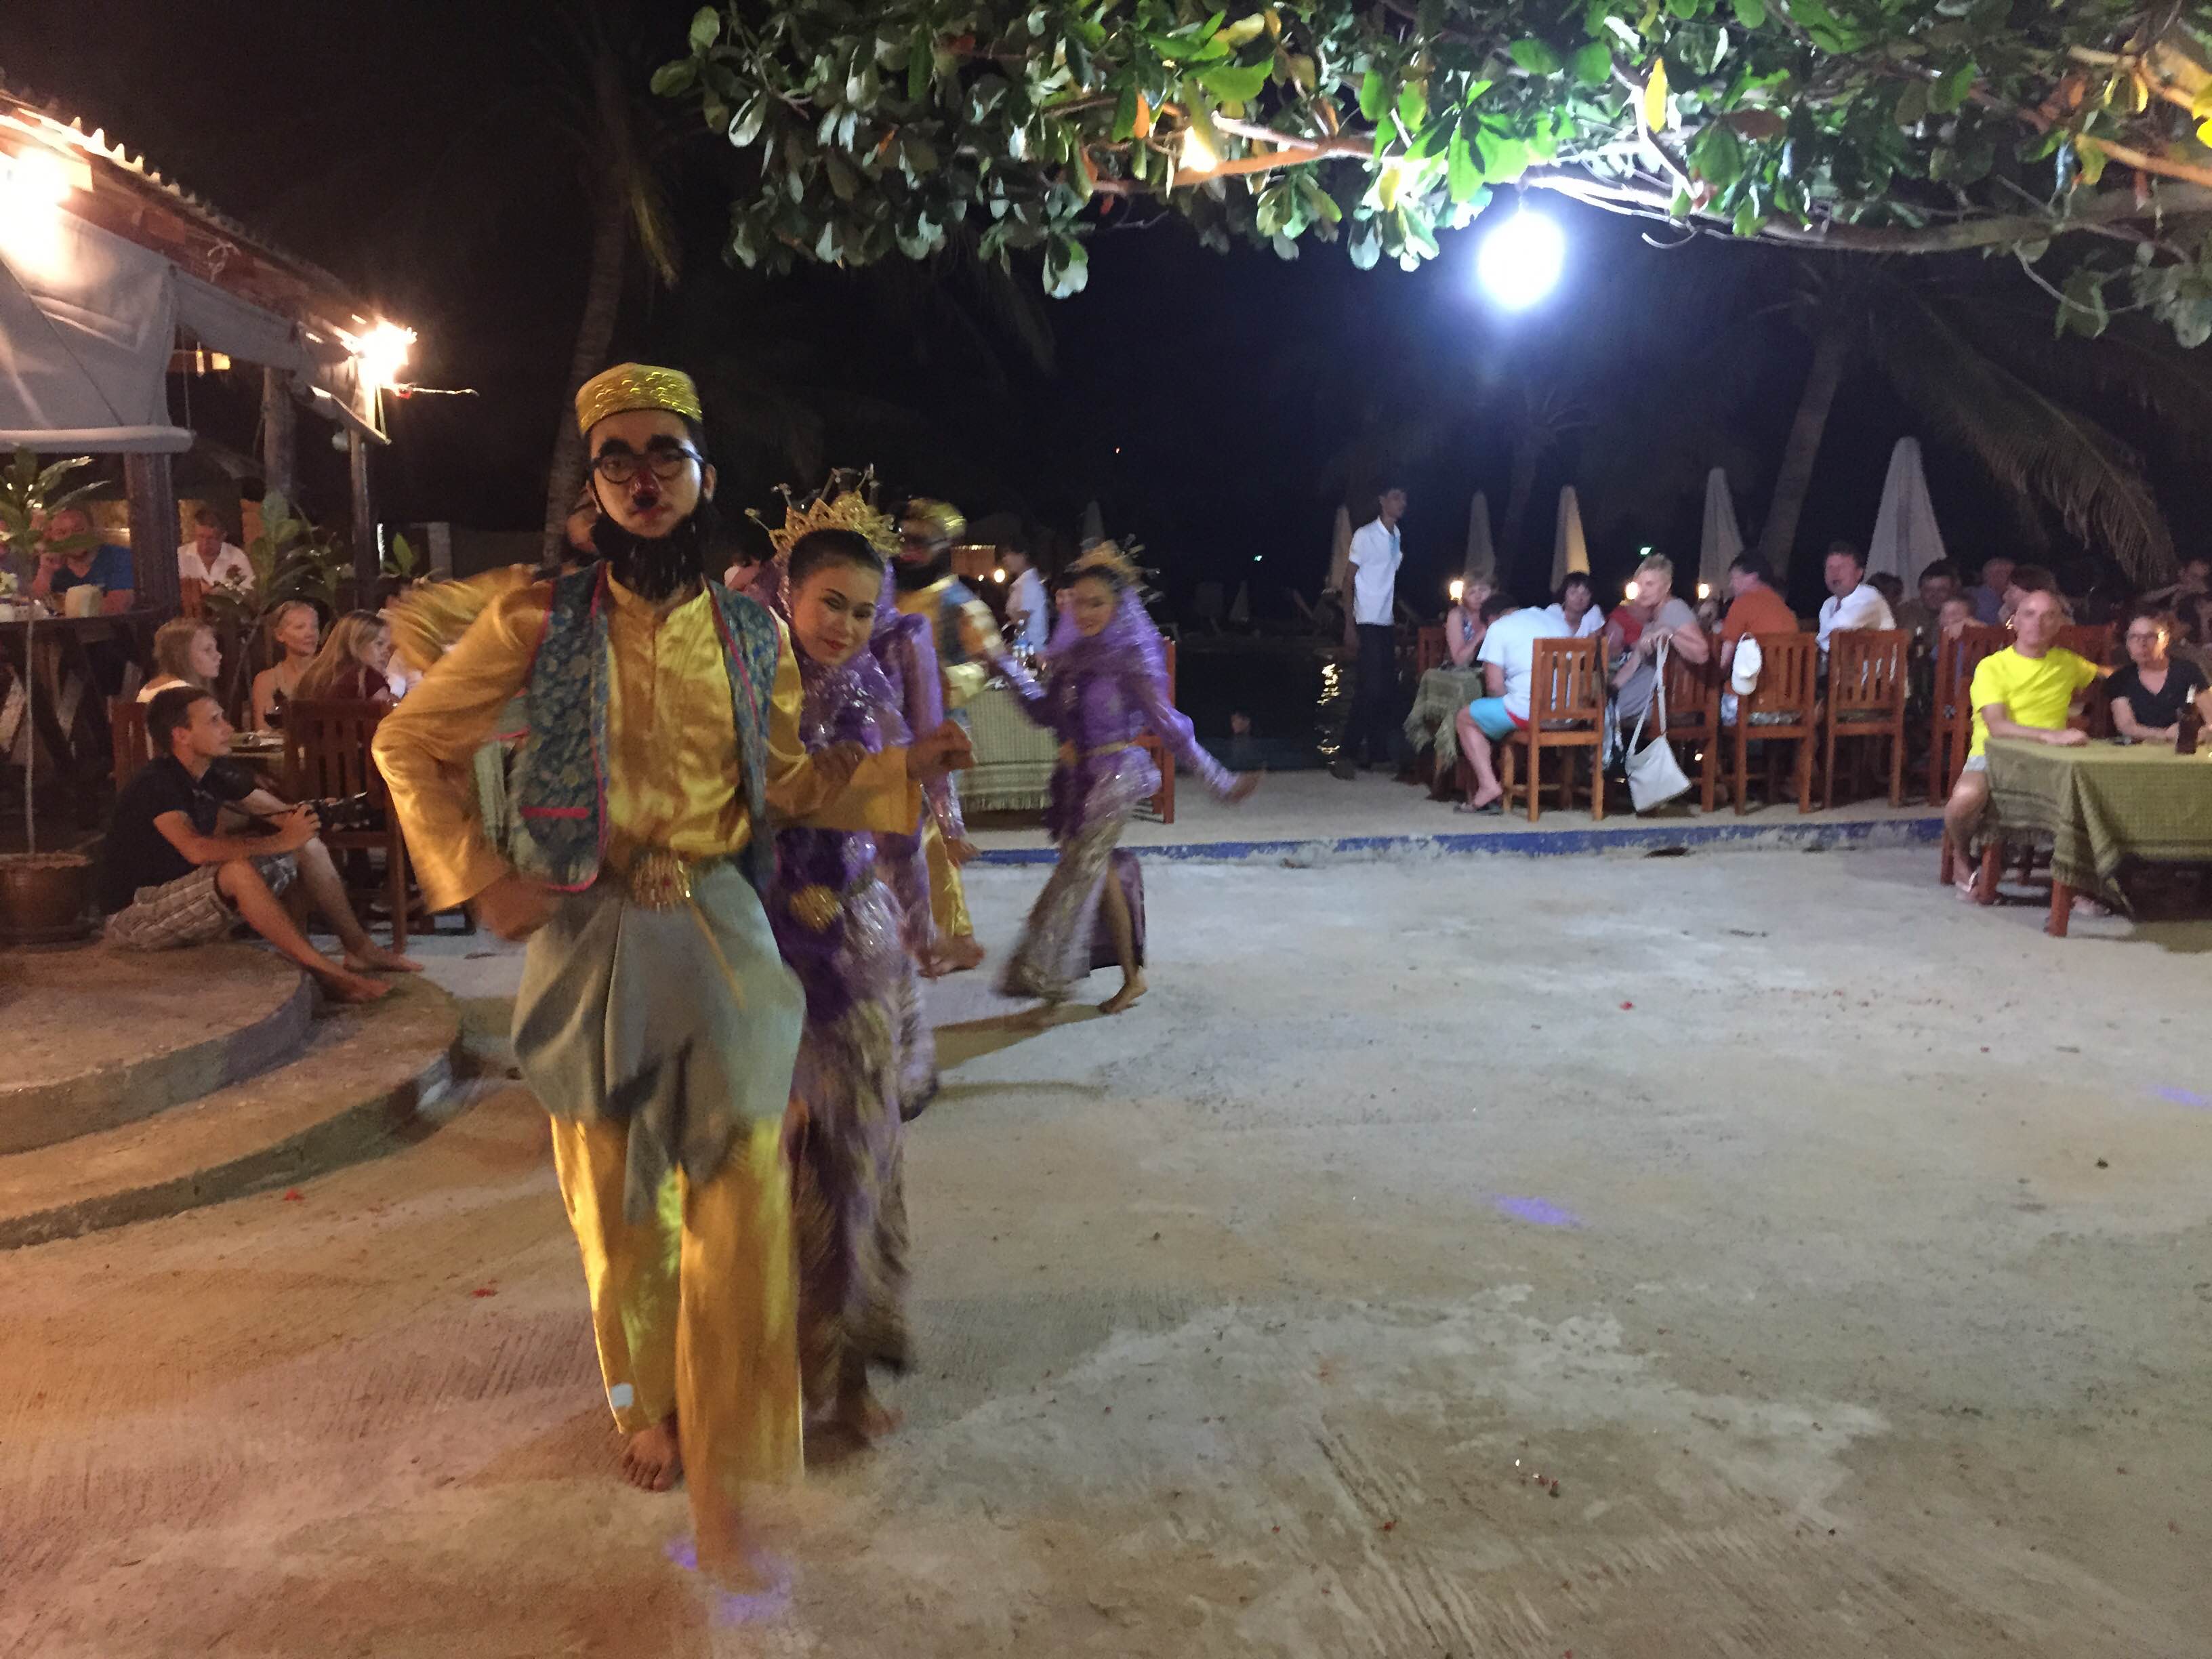 That part of the dinner show where Thai boys dressed up as middle eastern men (wearing the Groucho Marx glasses, except that the noses were cherry red) holding their beards and watching women dance and do work—soooo strange.